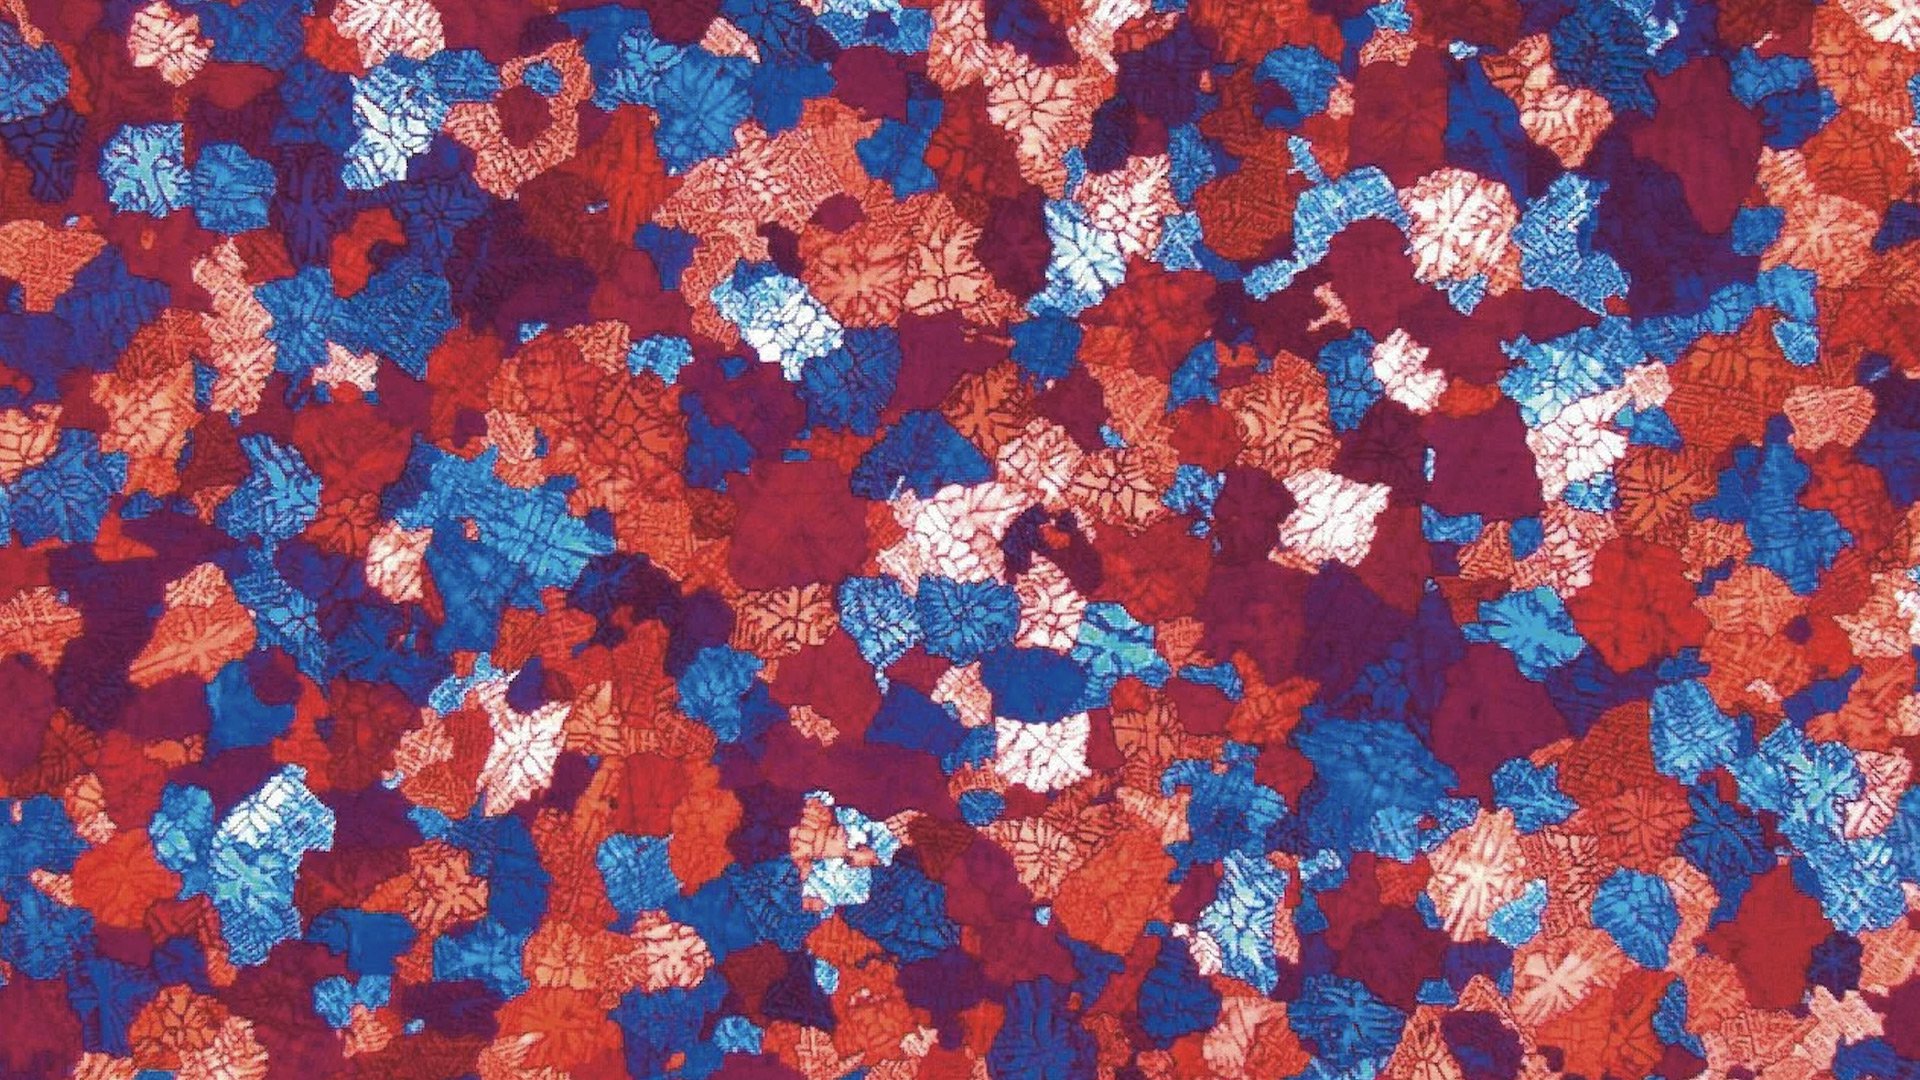 Coloured grains in a metal surface analysis